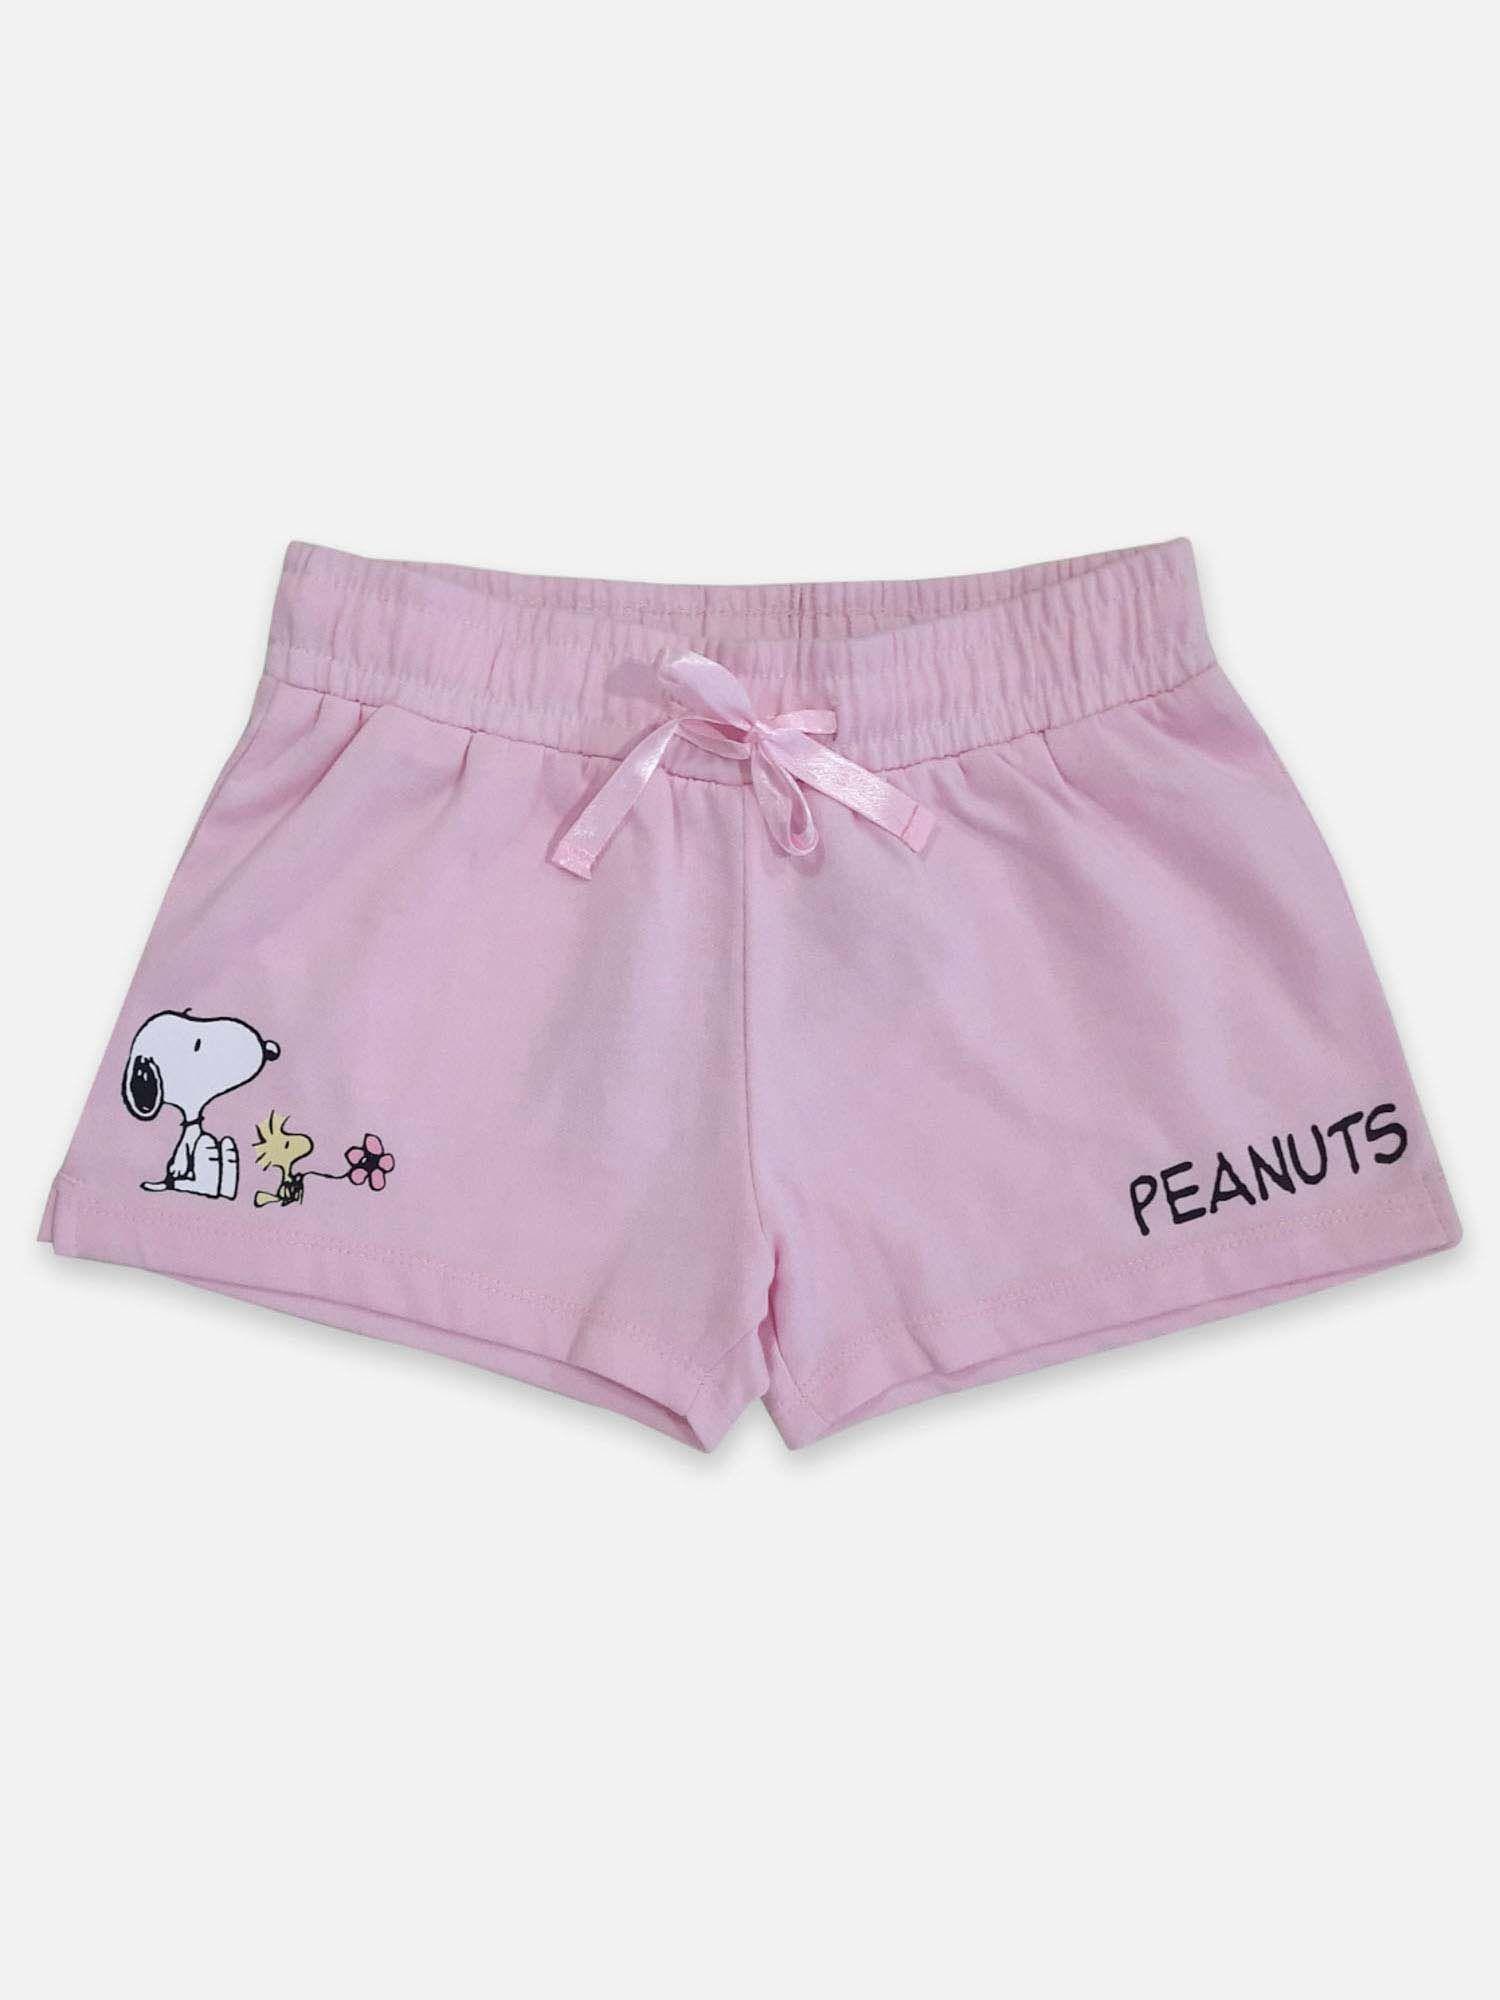 Peanuts Featured Shorts for Girls - Pink